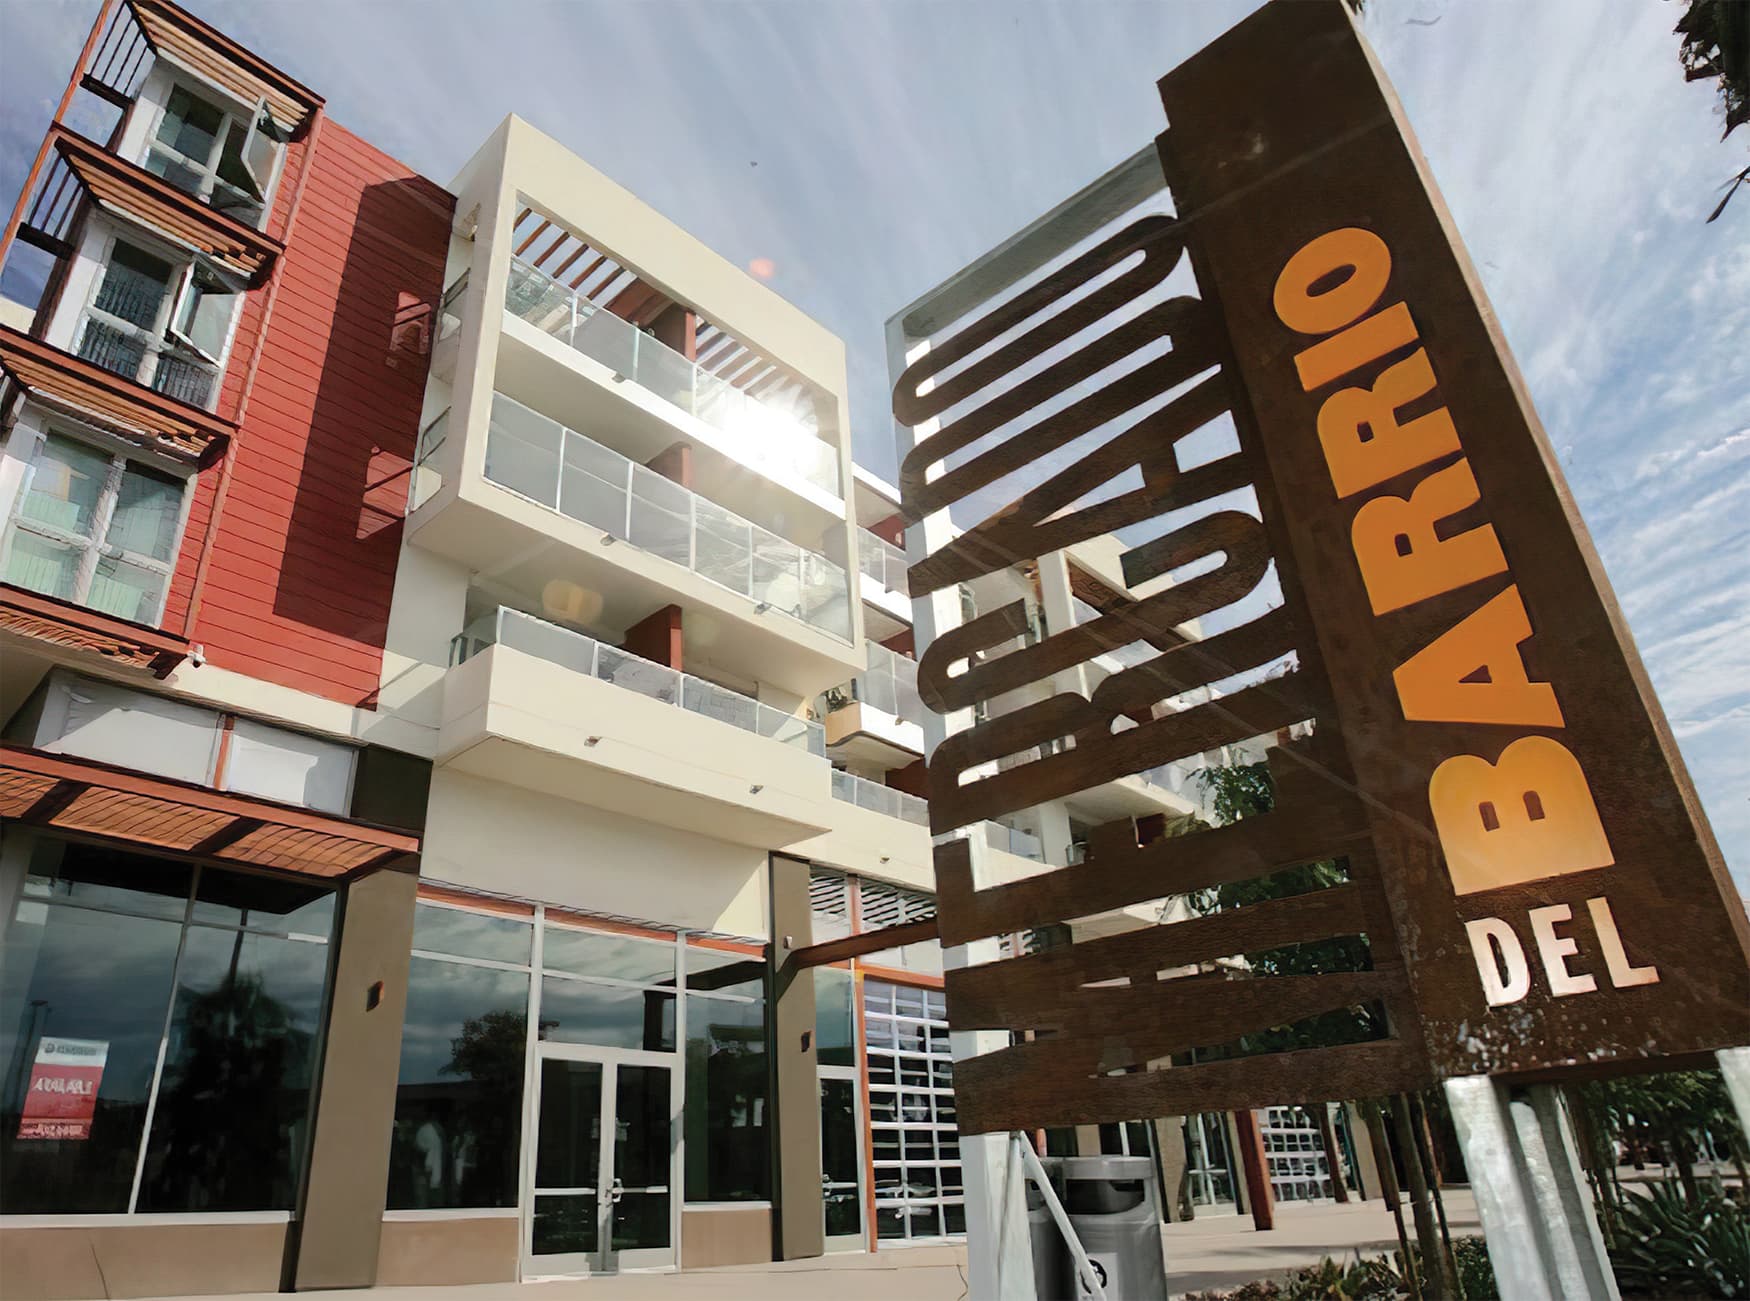 RSM Design worked with Shea Properties to prepare wayfinding signage, environmental graphics, and placemaking elements for Mercado del Barrio, a residential and commercial mixed-use development located in San Diego, California. Identity Signage.